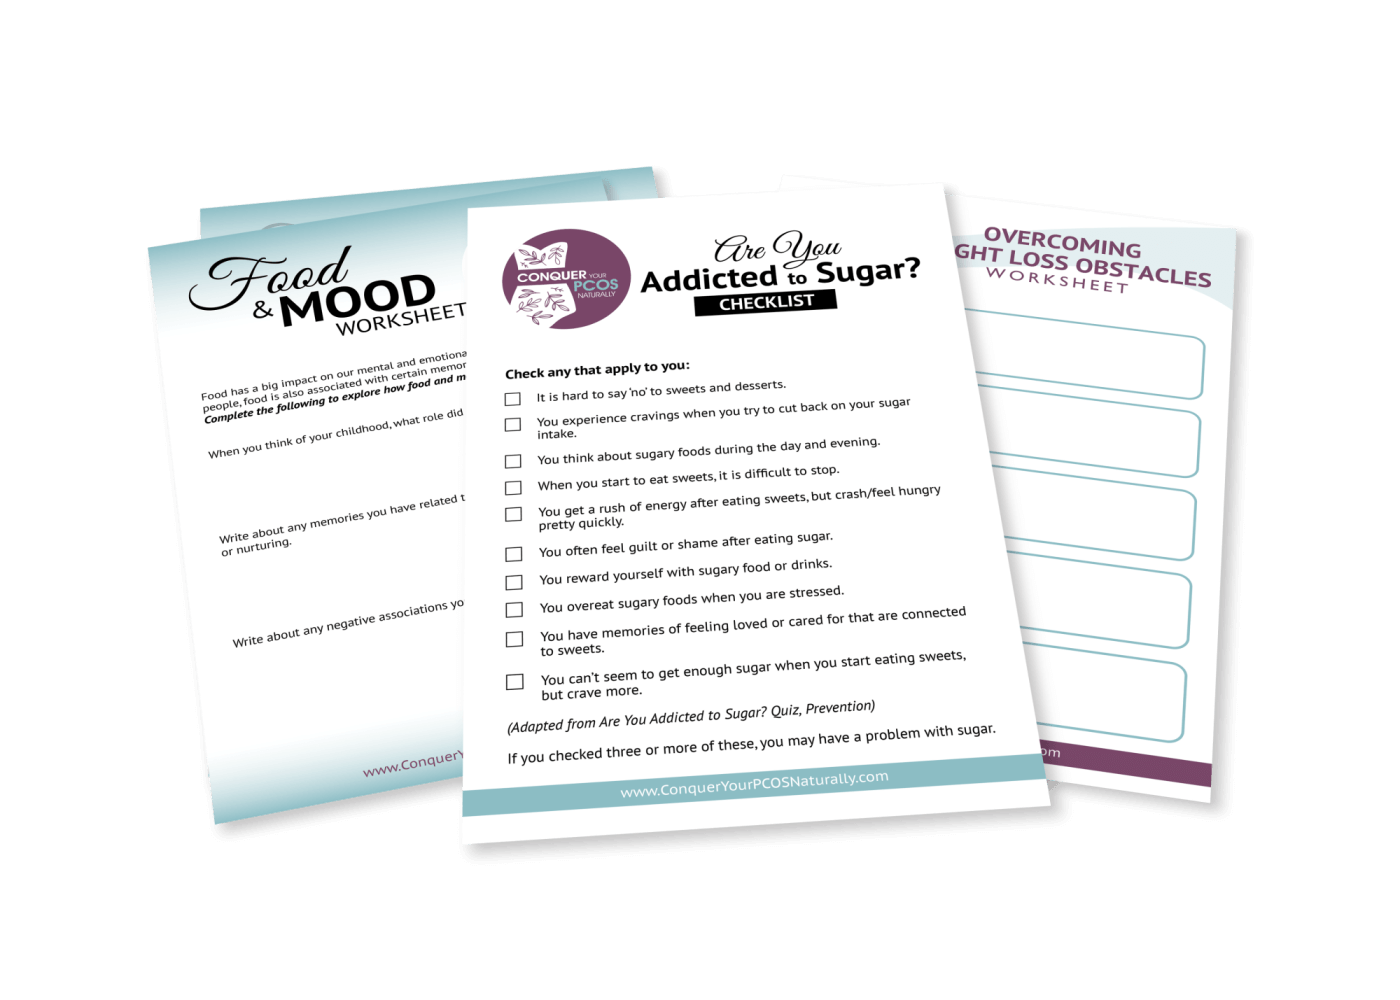 pcos ad pcod food worksheets 